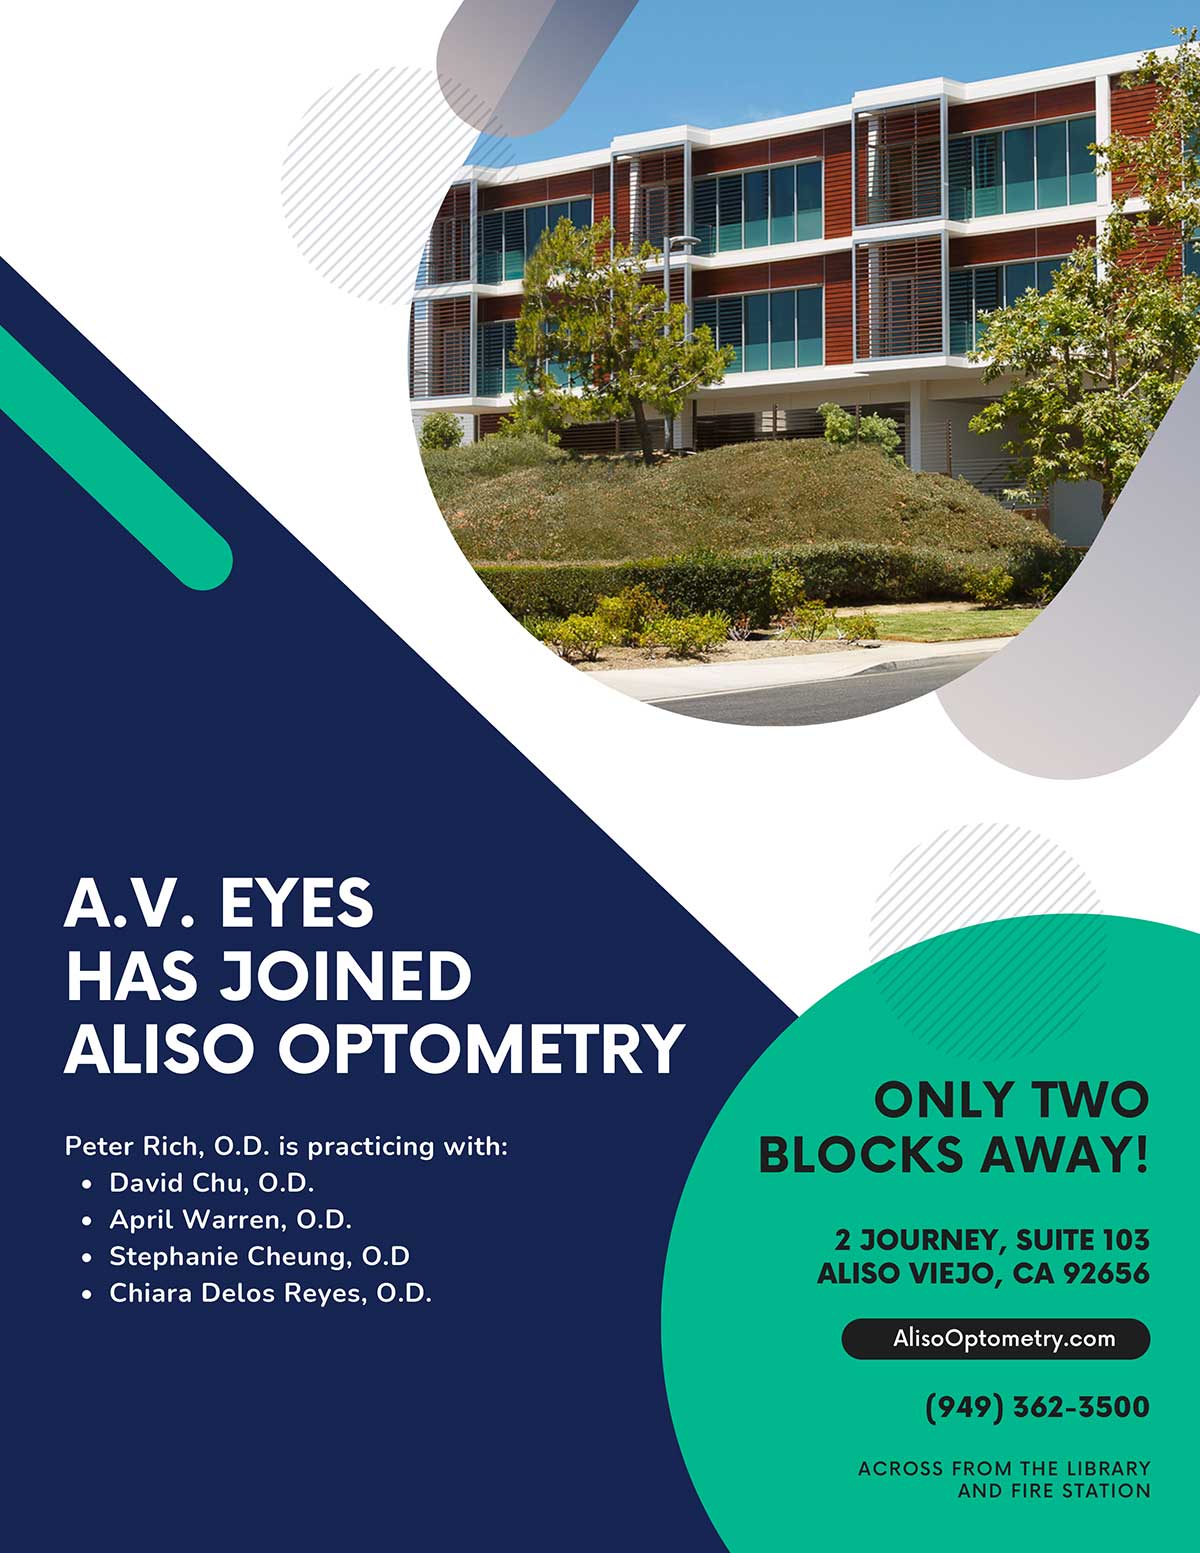 A.V. Eyes Will Be Joining Aliso Optometry